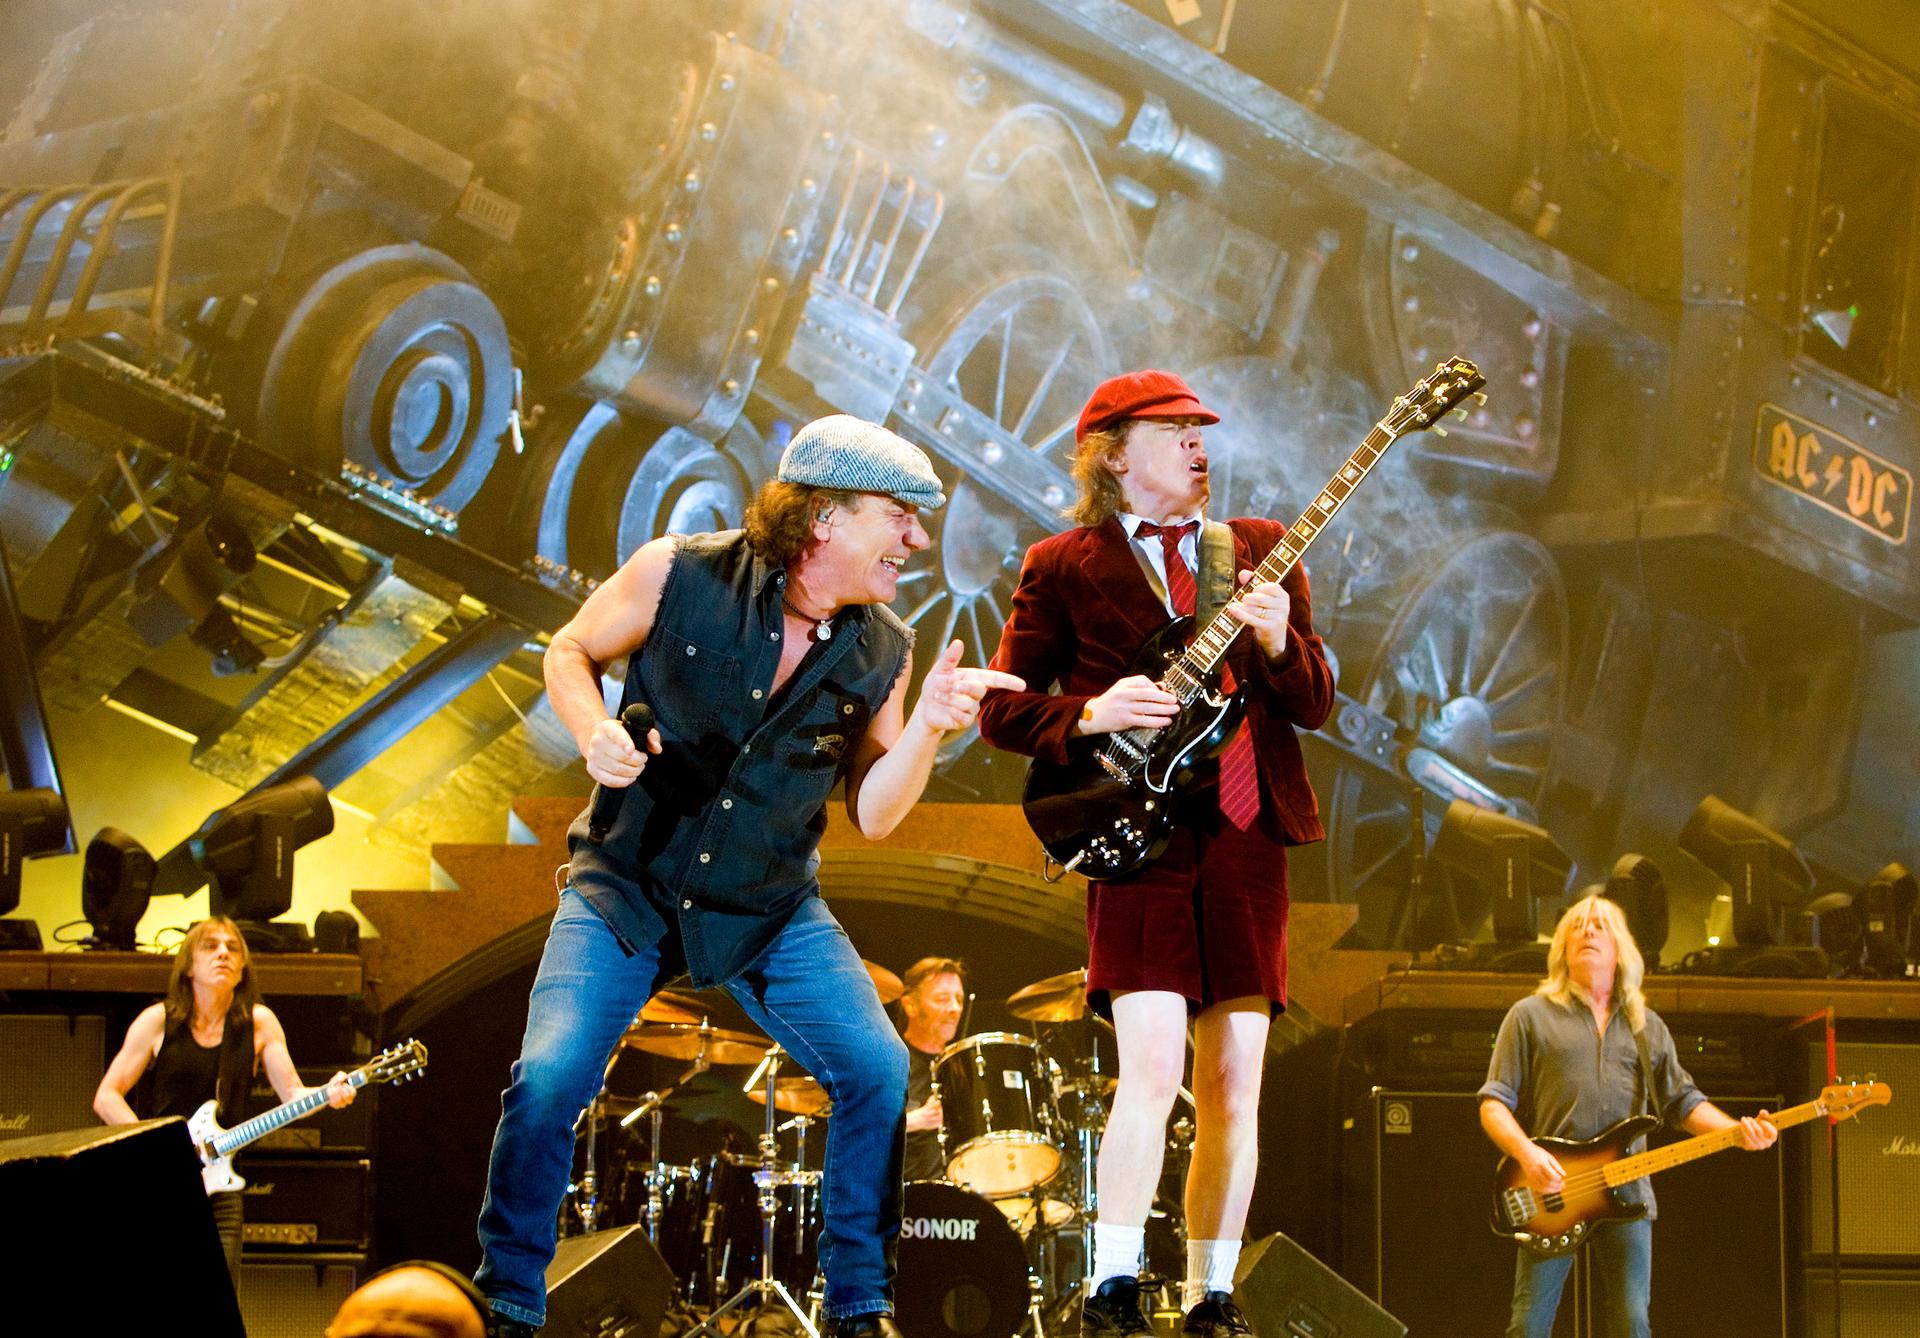 Rock band AC/DC lead guitarist Angus Young (R) and vocalist Brian Johnson perform during a concert at the Telenor Arena in Fornebu, near Oslo February 18, 2009.